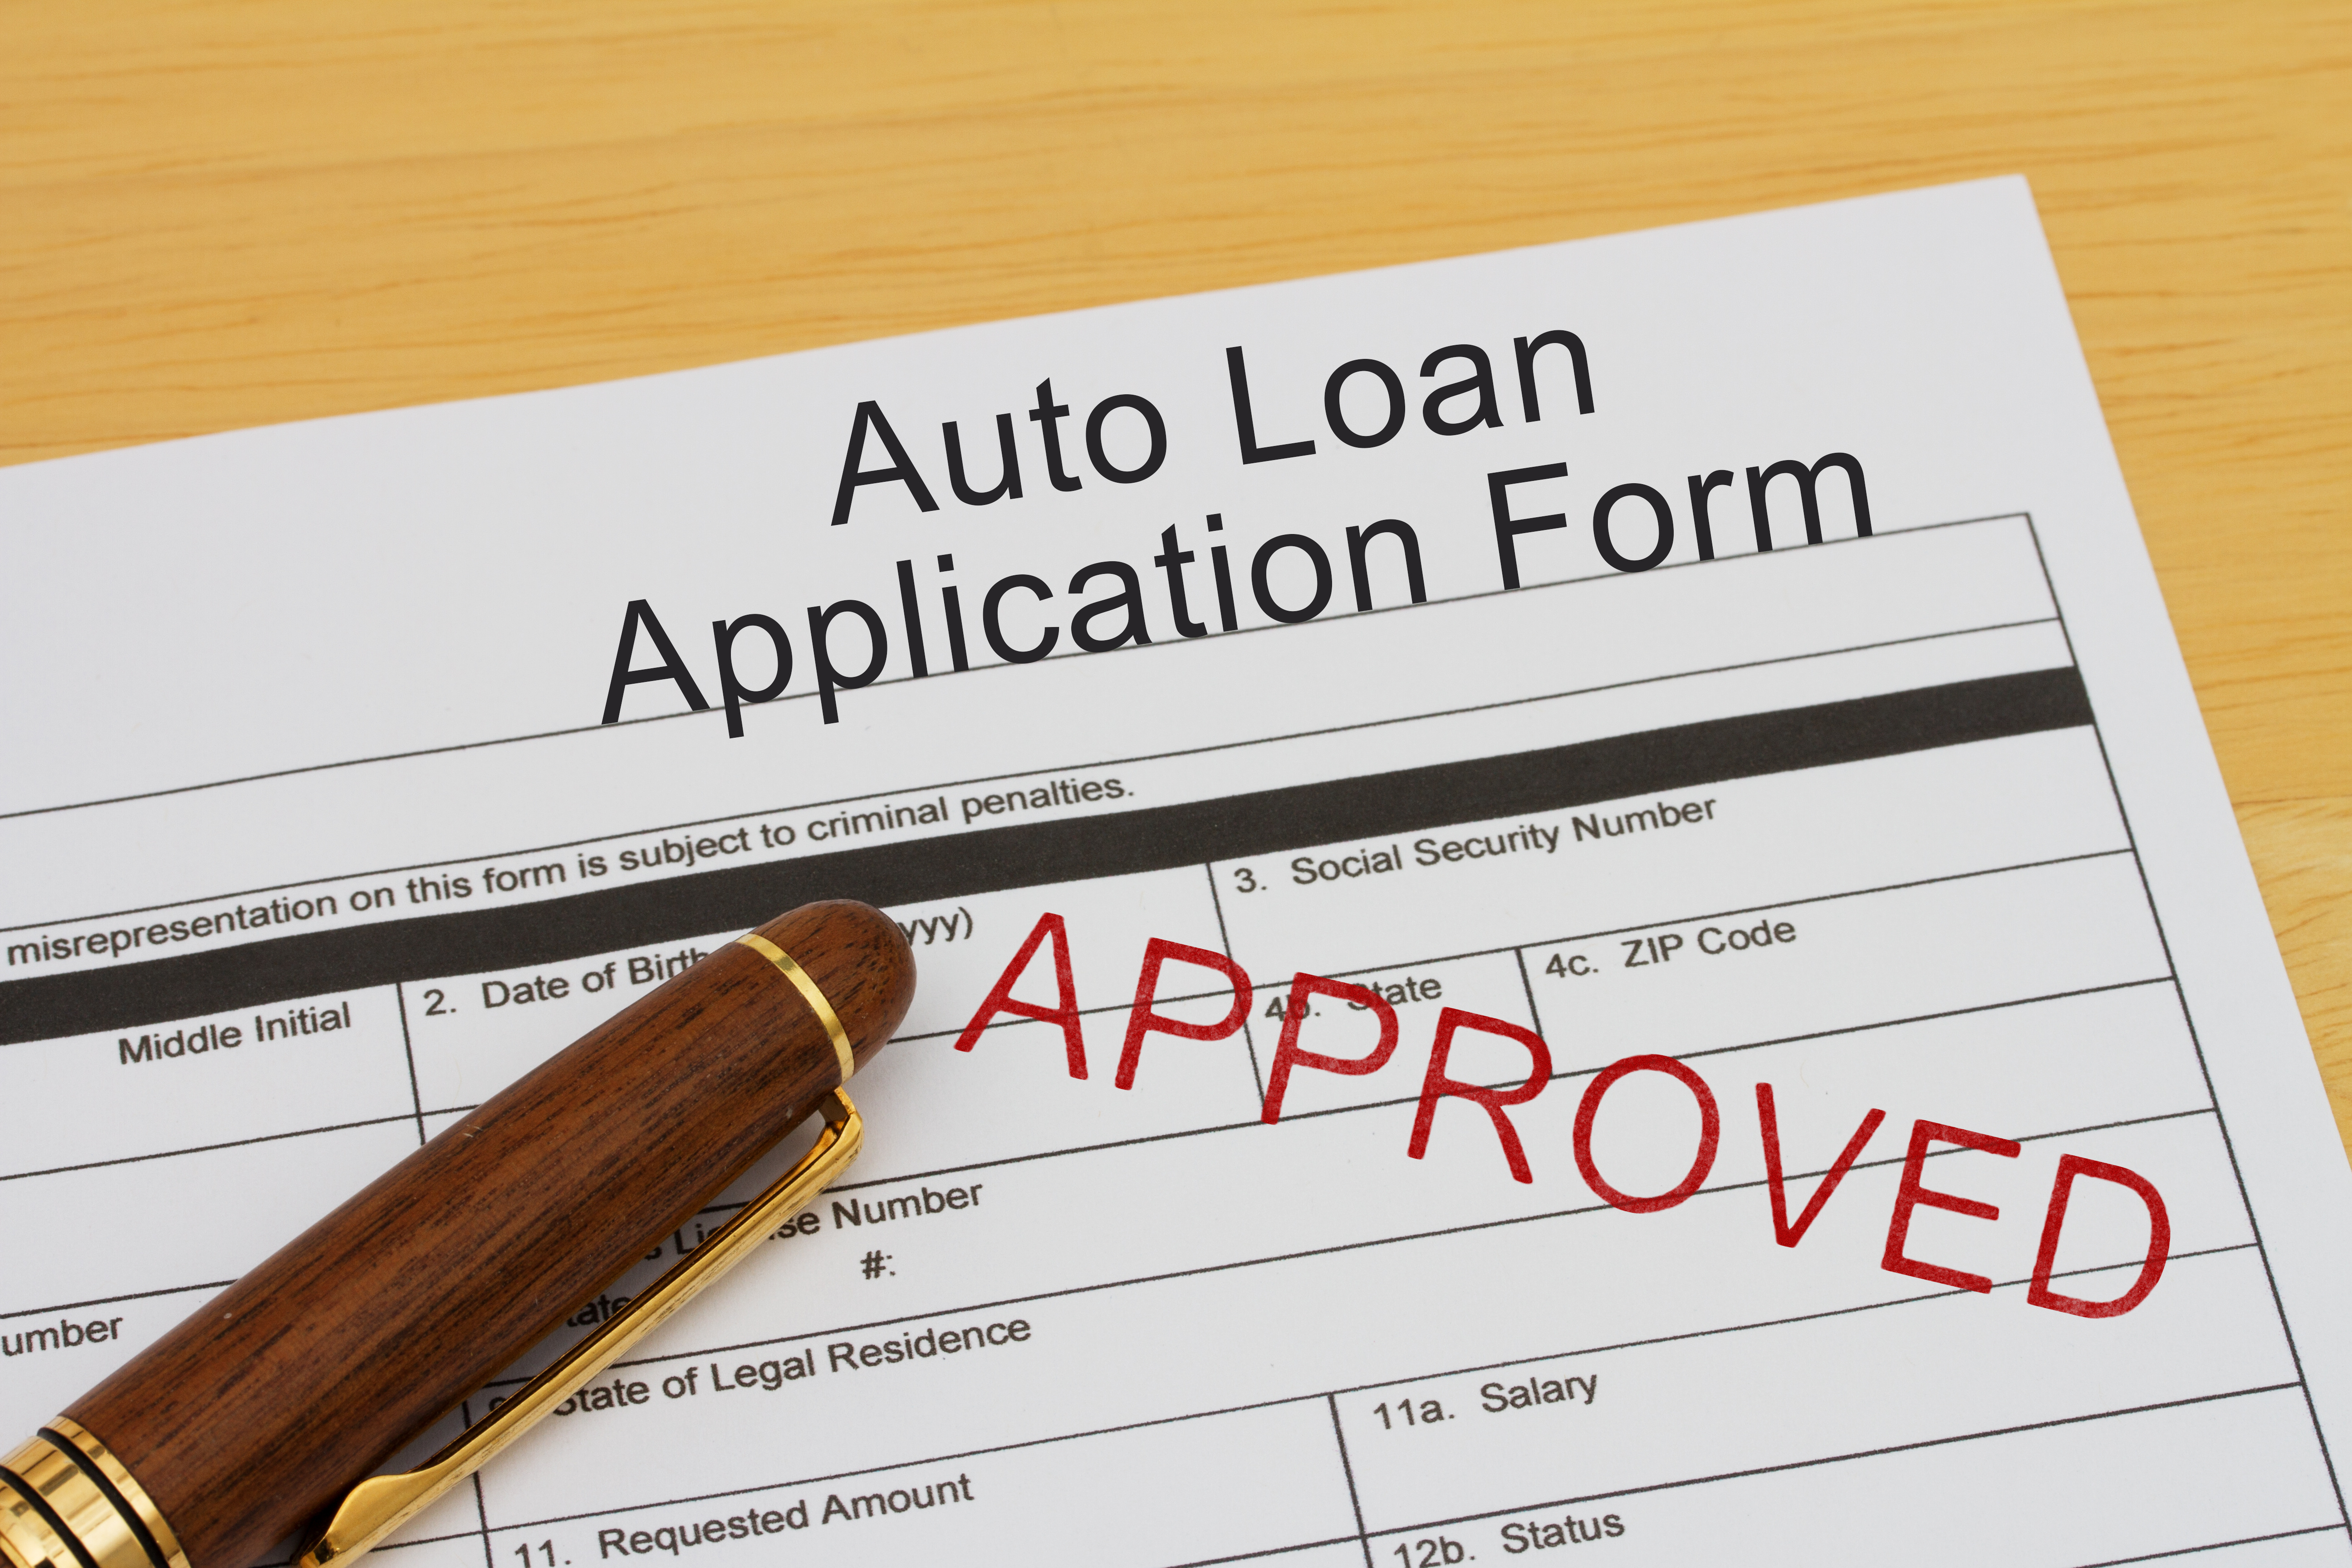 Auto title loans in Weston can help you get the cash you need quickly, while allowing you to keep driving your car.